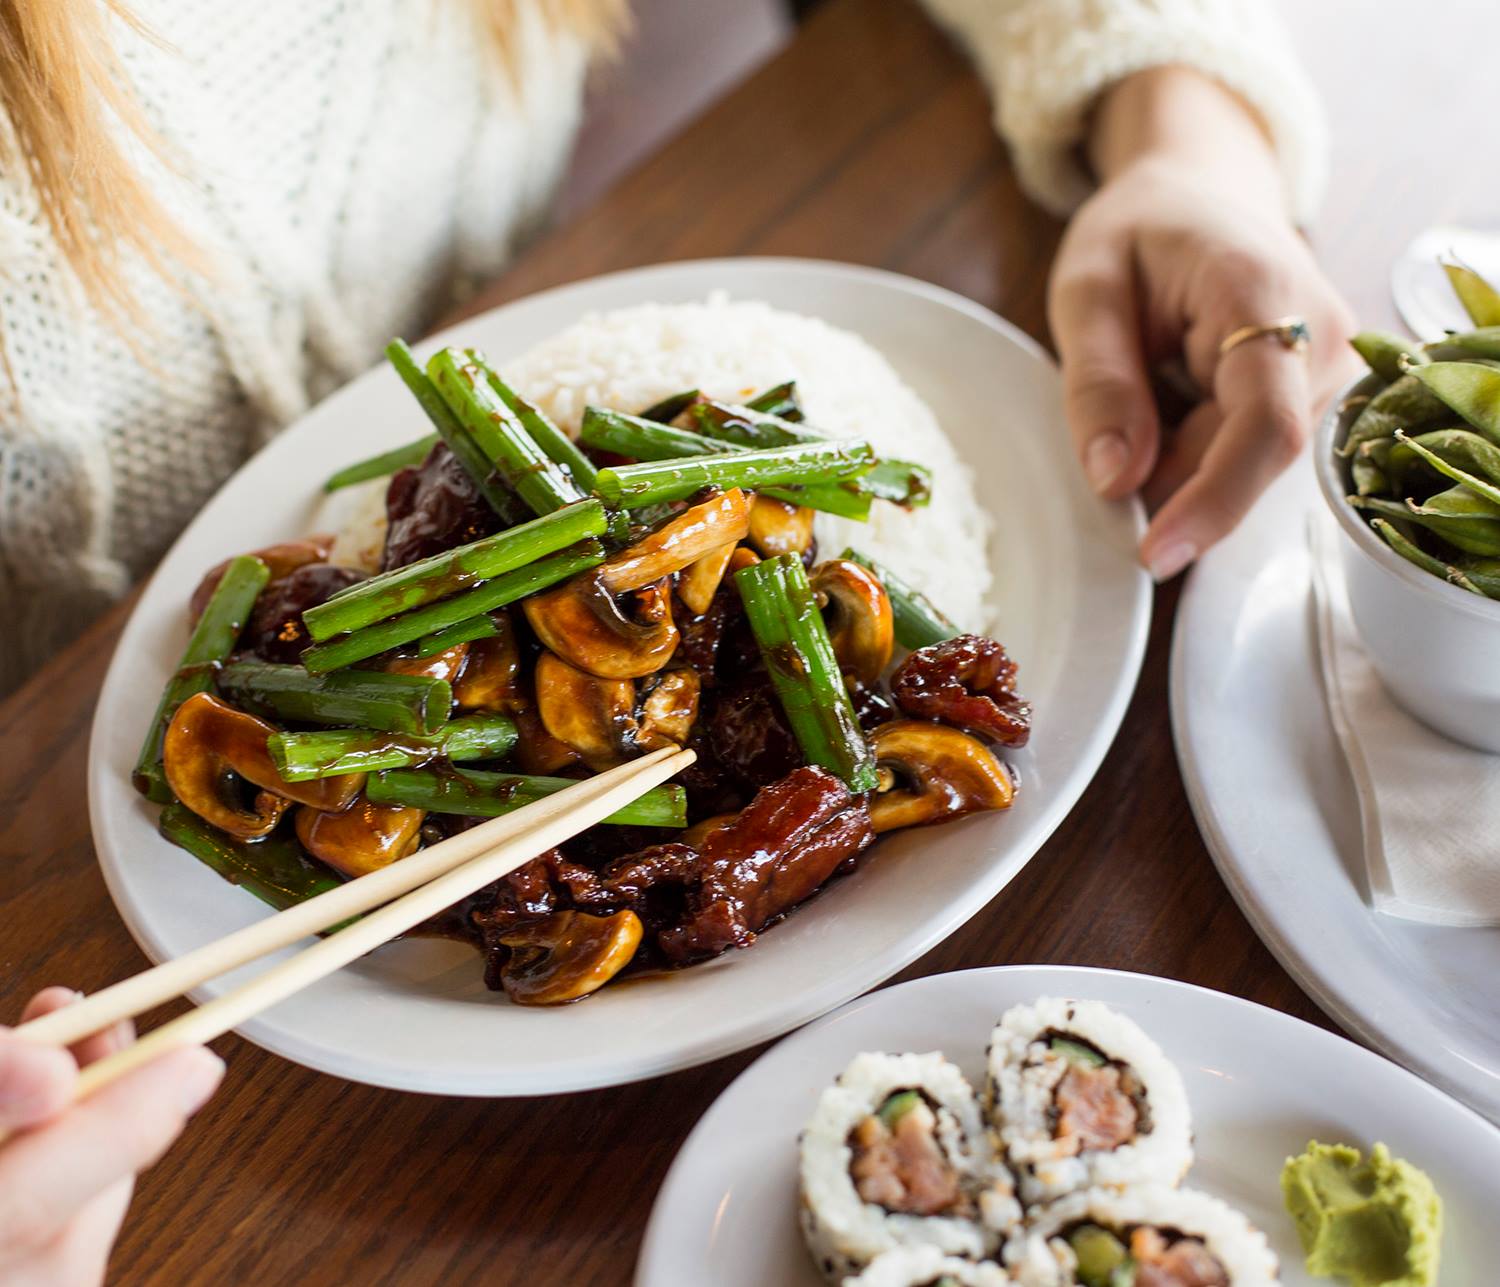 Get 50% off all online entrée orders at Pei Wei